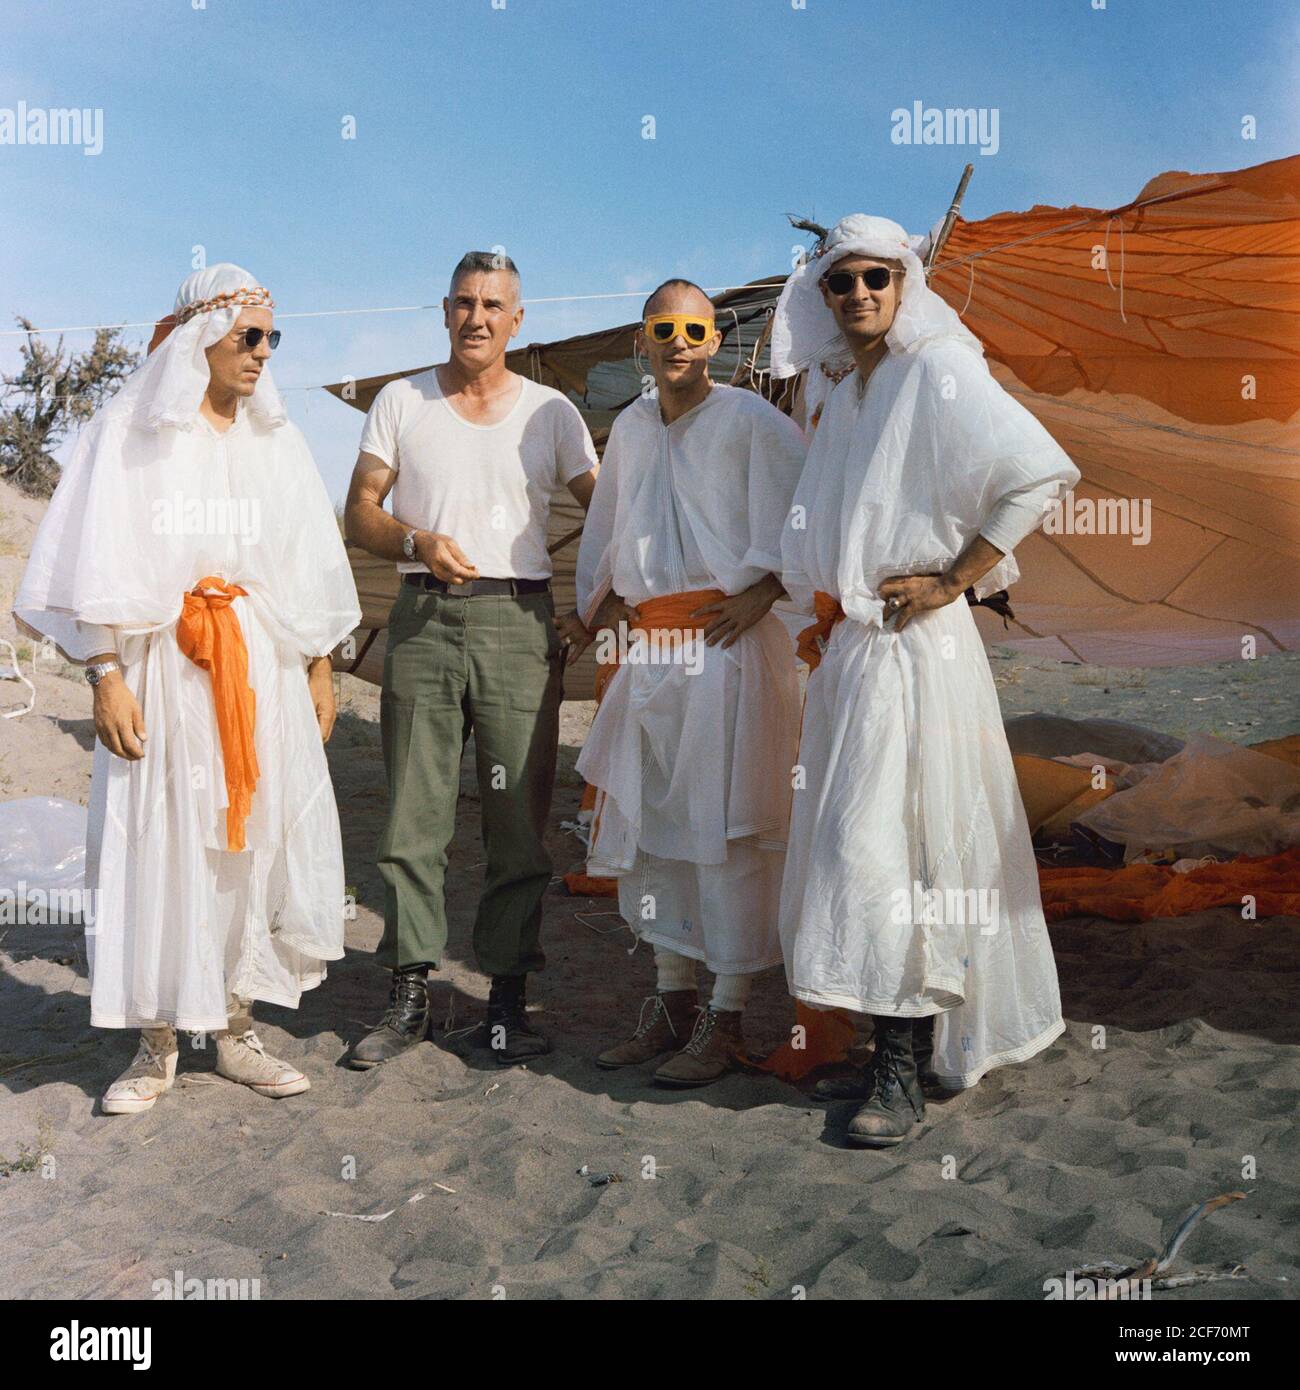 Three astronauts participating in Apollo desert survival training in Washington state pose with Air Force Col. Chester Bohart (second from right). Standing from left to right are Charles M. Duke, Jr., Thomas K Mattingly, Col. Bohart, and John L. Swigert. Since the Mercury Program, astronauts have taken survival courses in case they are forced to land on a remote part of the Earth where they may need to do without human help for several weeks Stock Photo